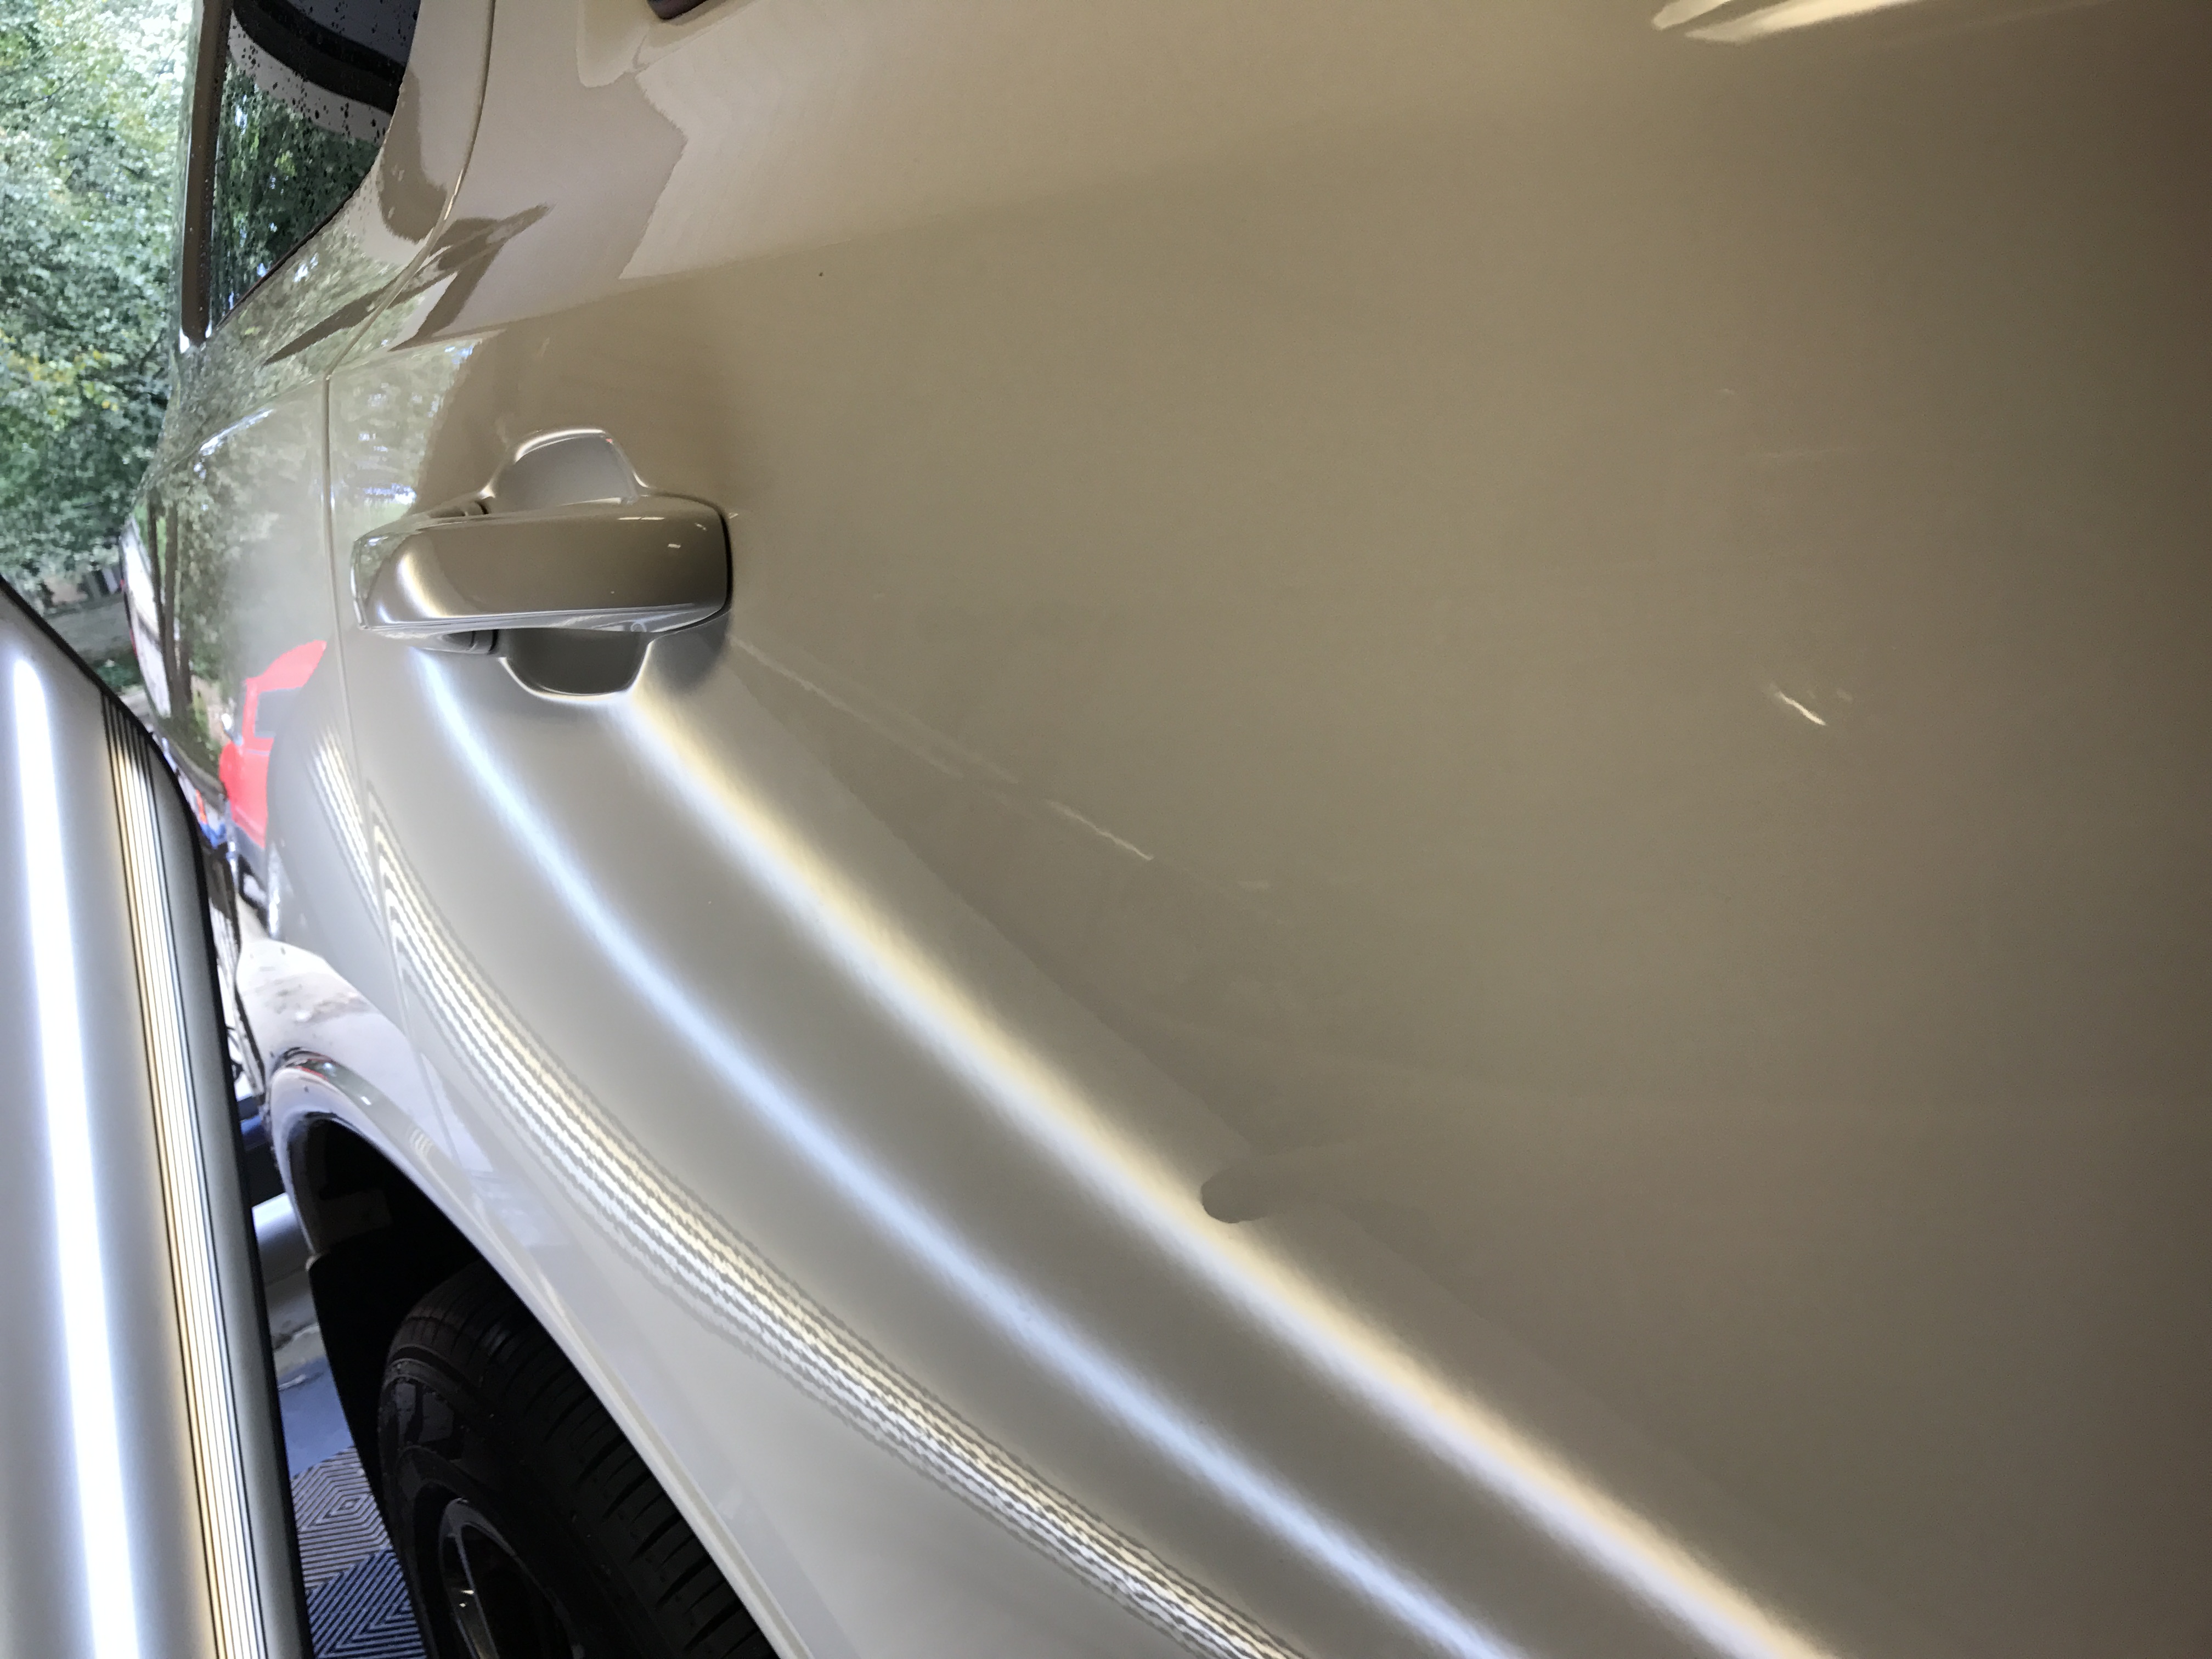 2015 Dodge Durango RT Paintless Dent Removal, Springfield IL http://217dent.com After Image of door damage